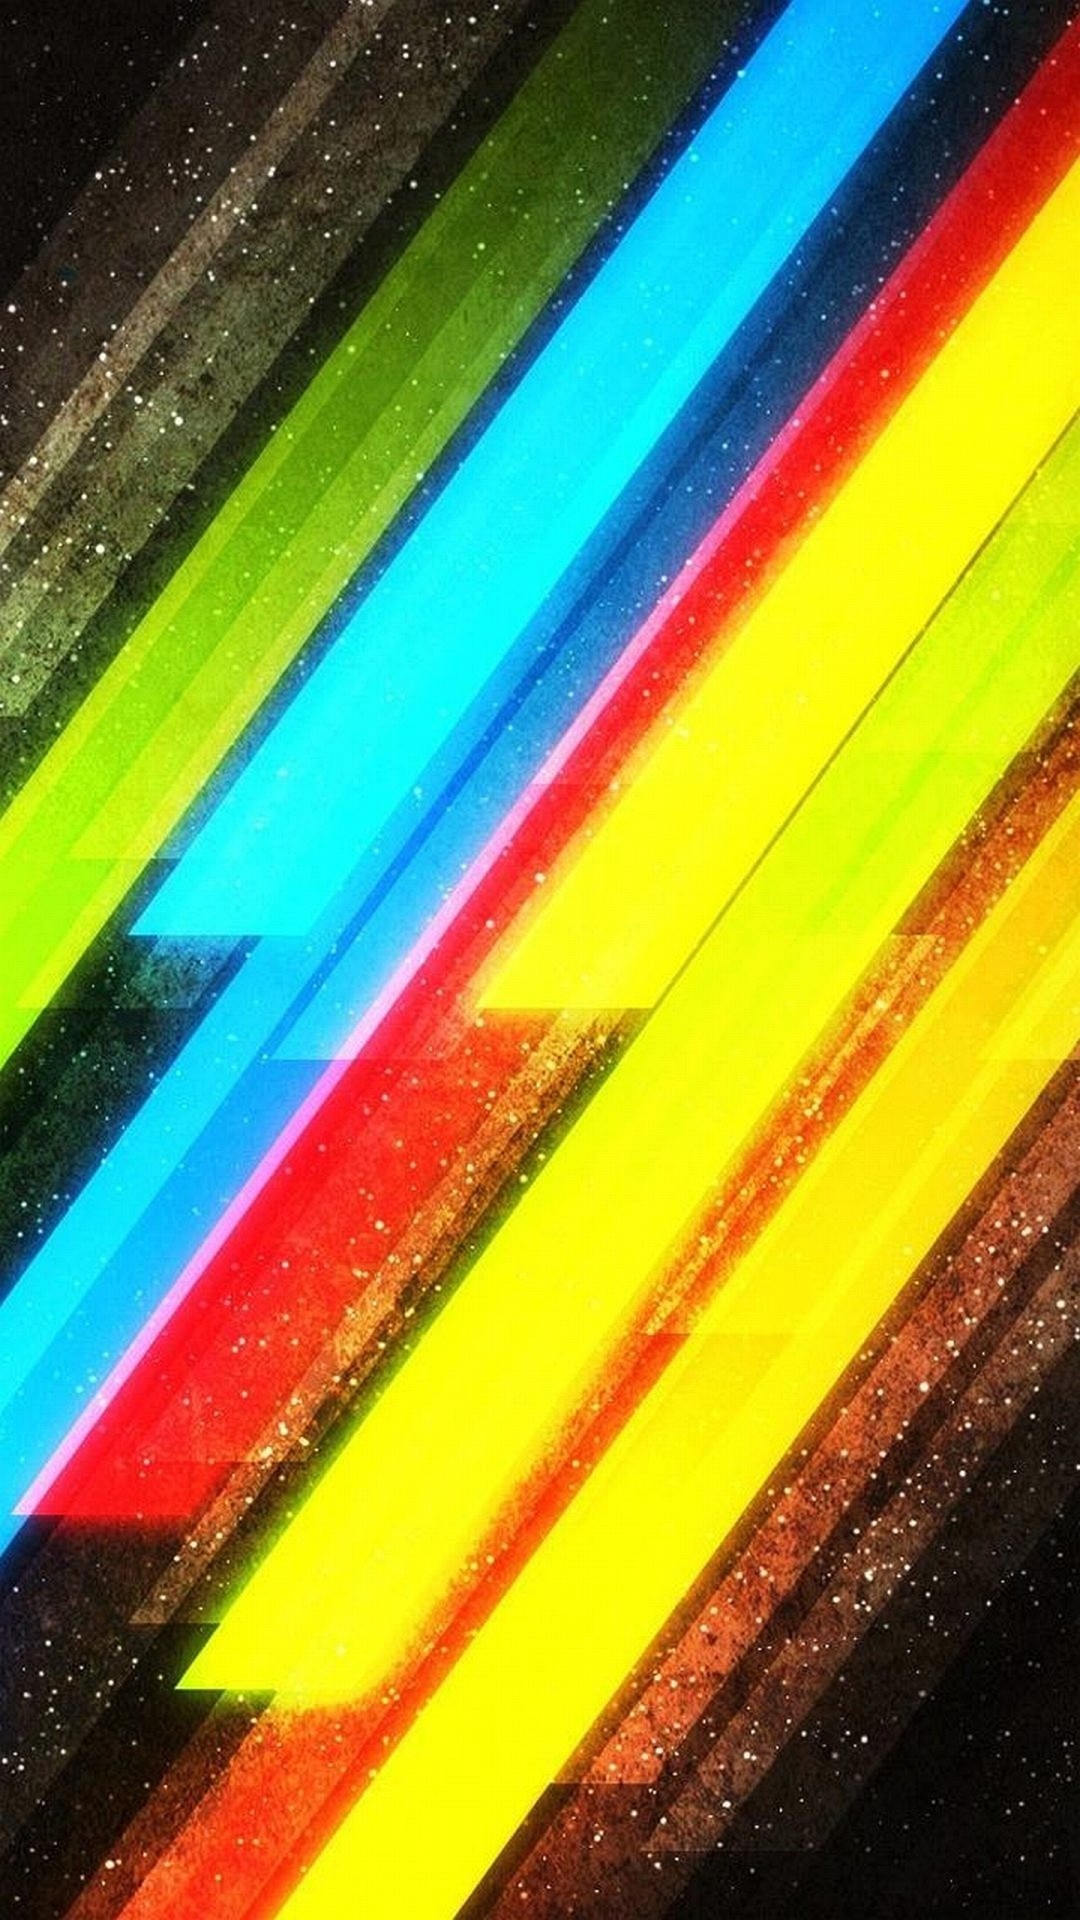 1080x1920 Z wallpaper iphone 6 plus striped colors 5 5 inches 149